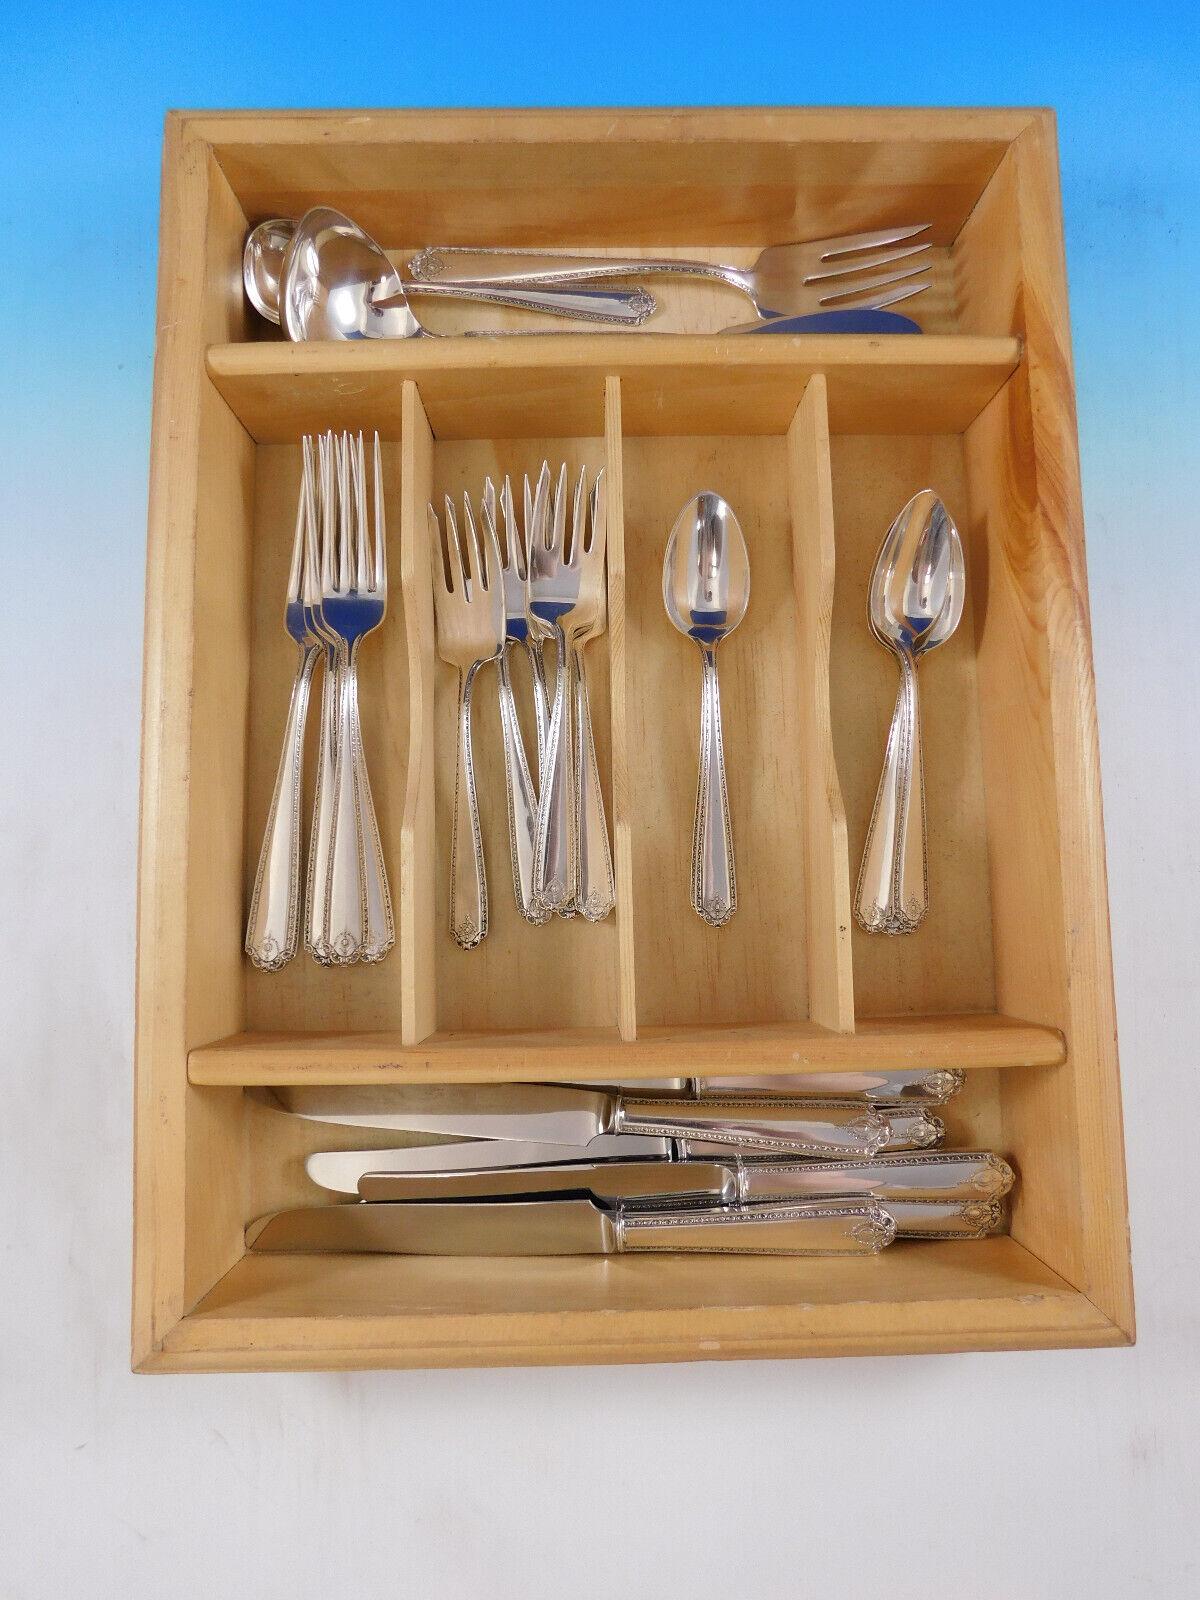 Lady Hilton by Westmorland sterling silver flatware set, 28 pieces. Great starter set! This set includes:

6 knives, 8 3/4